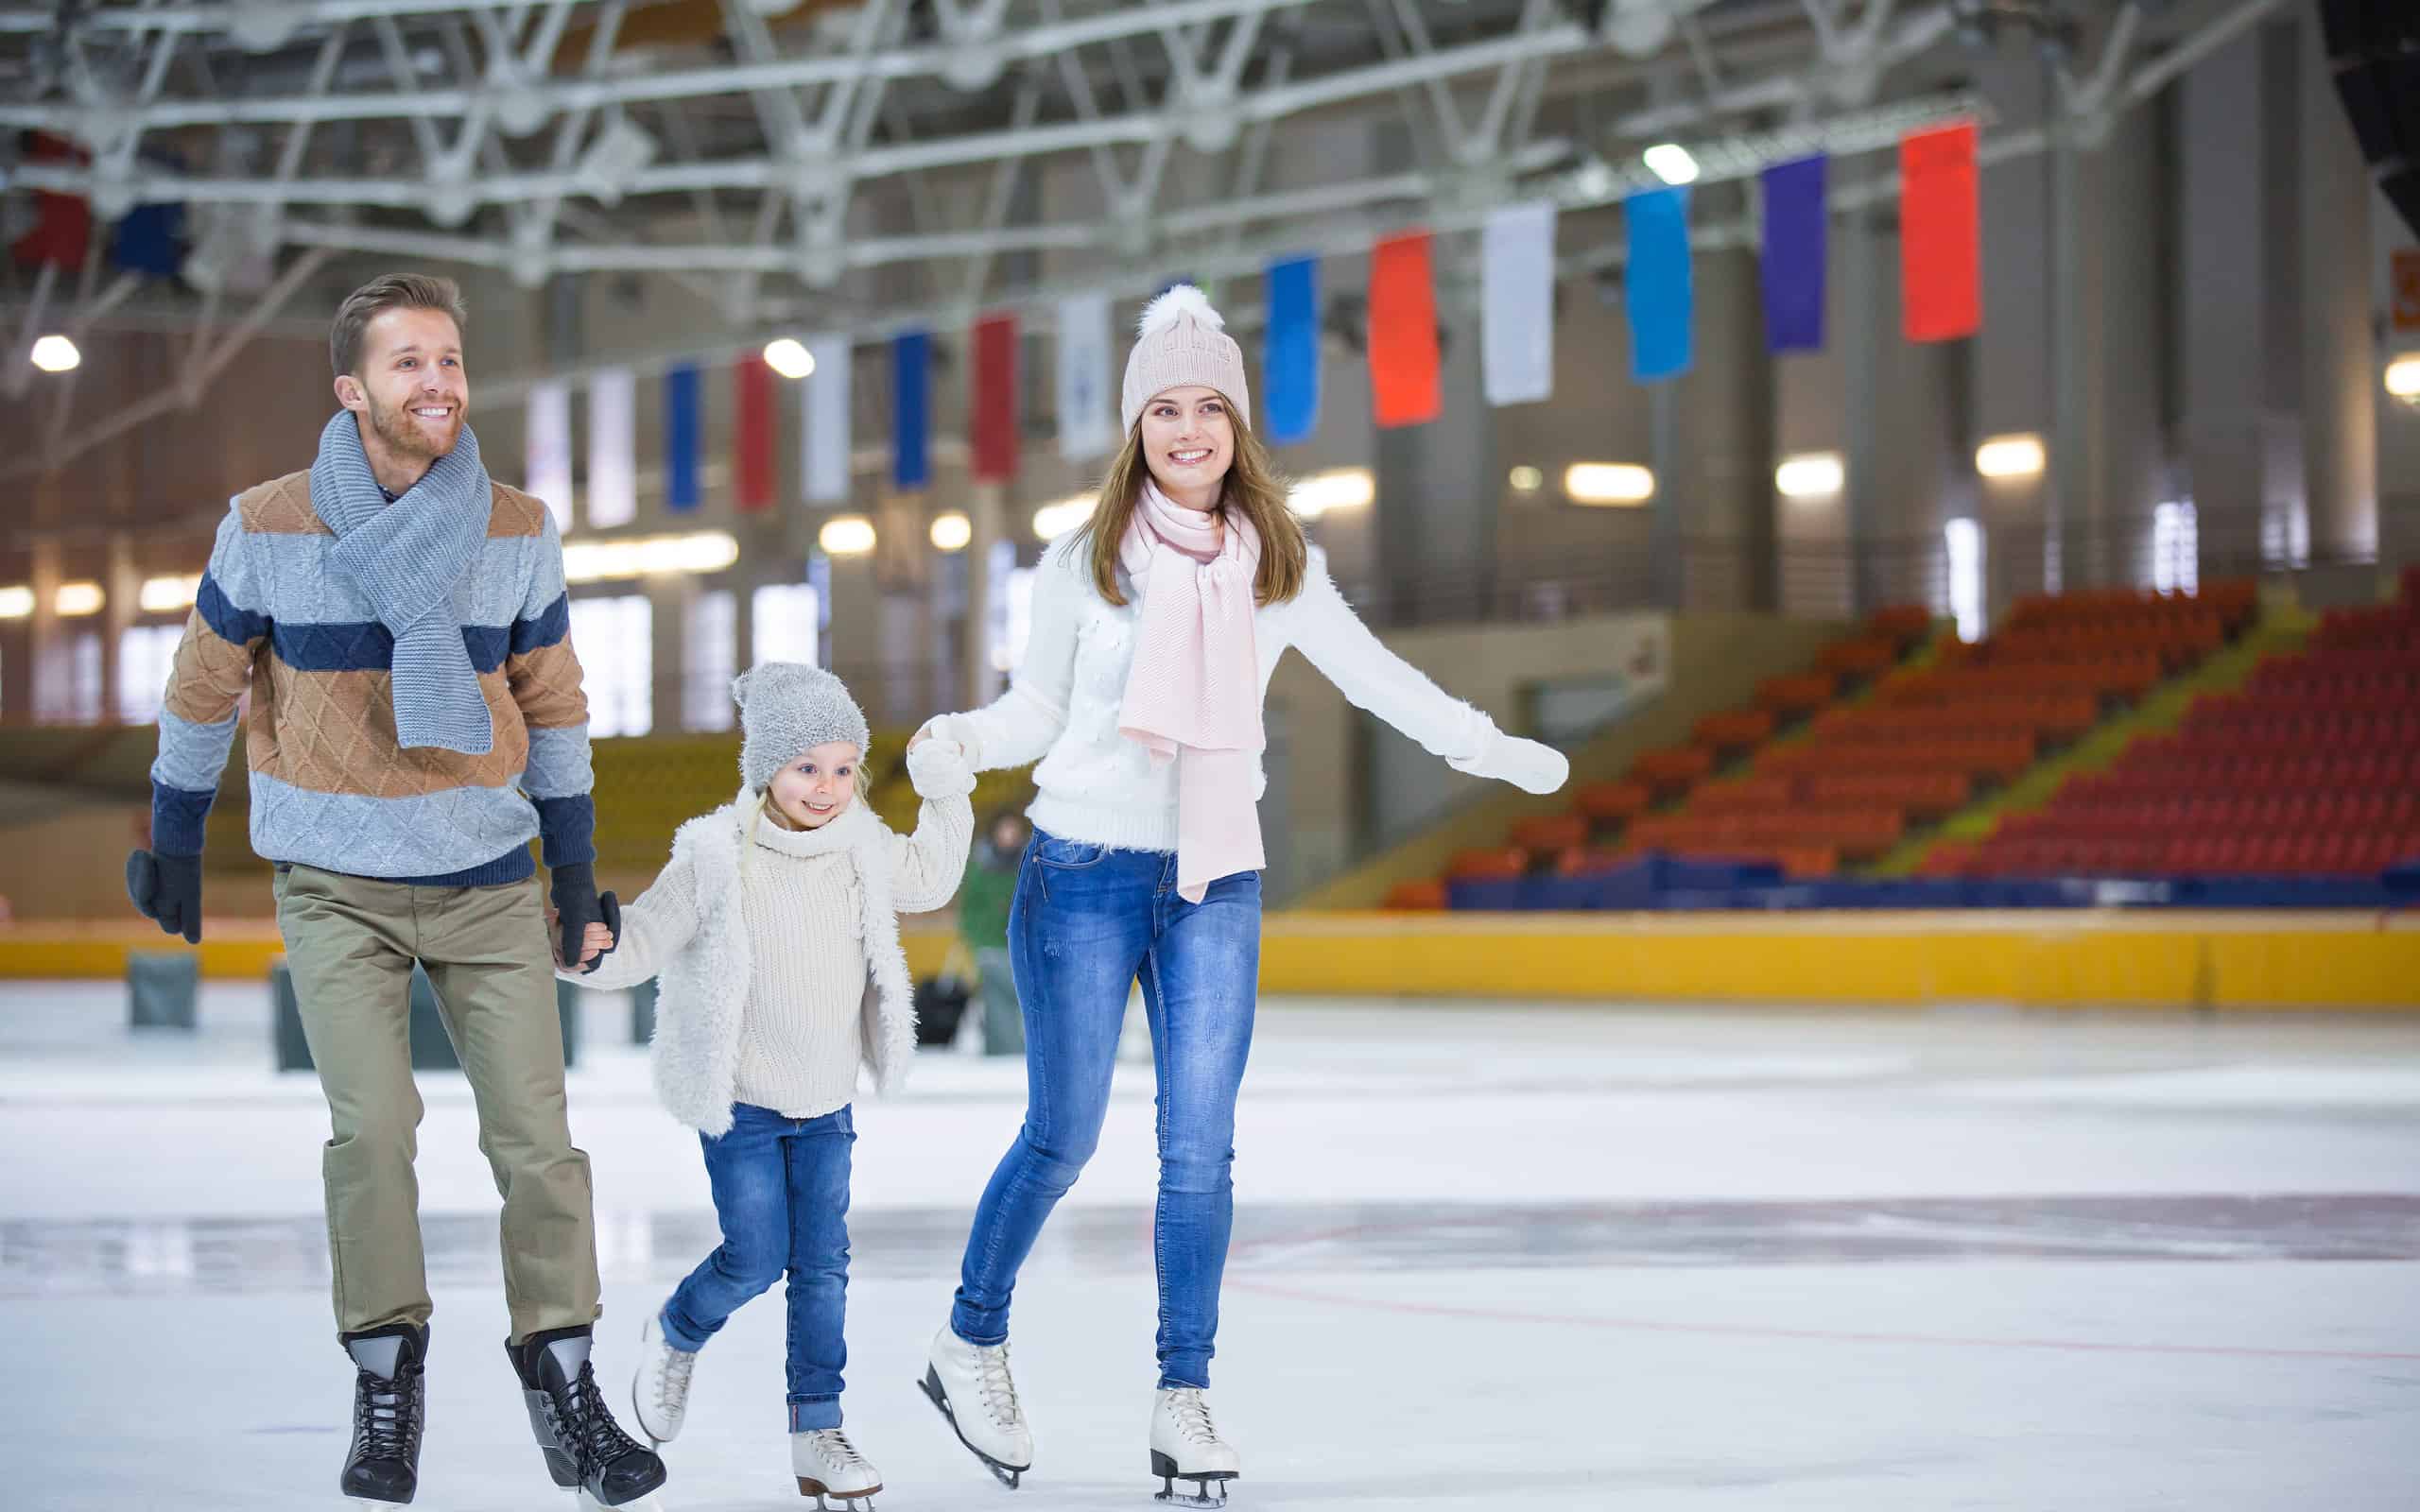 Ice-skating, Family, Ice Rink, Indoors, People